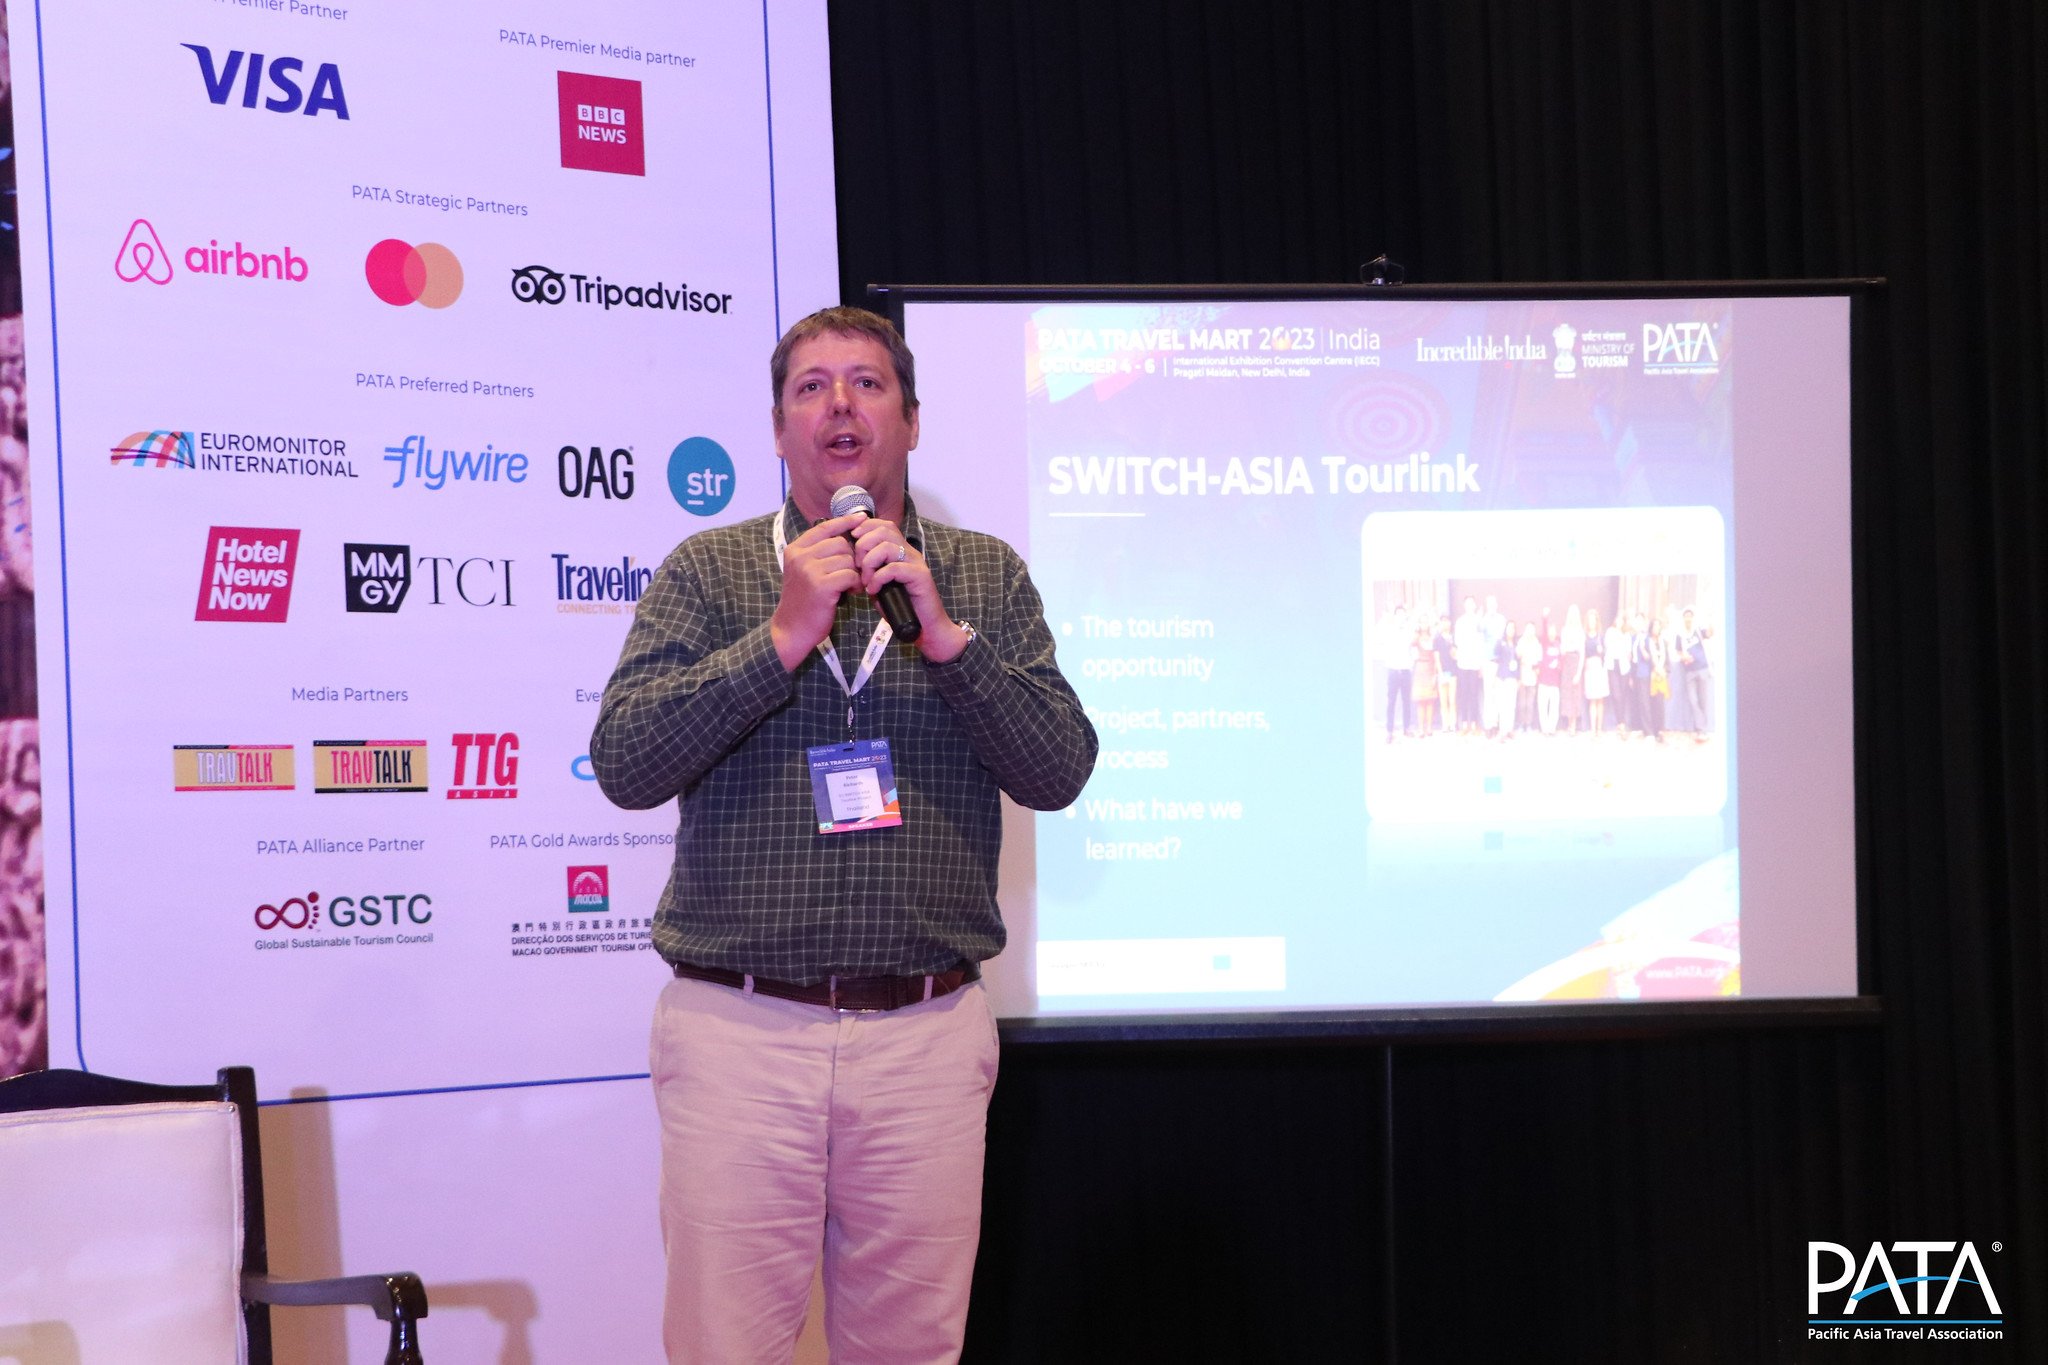   Peter Richards, Project Manager, Tourlink SwitchAsia Programme  